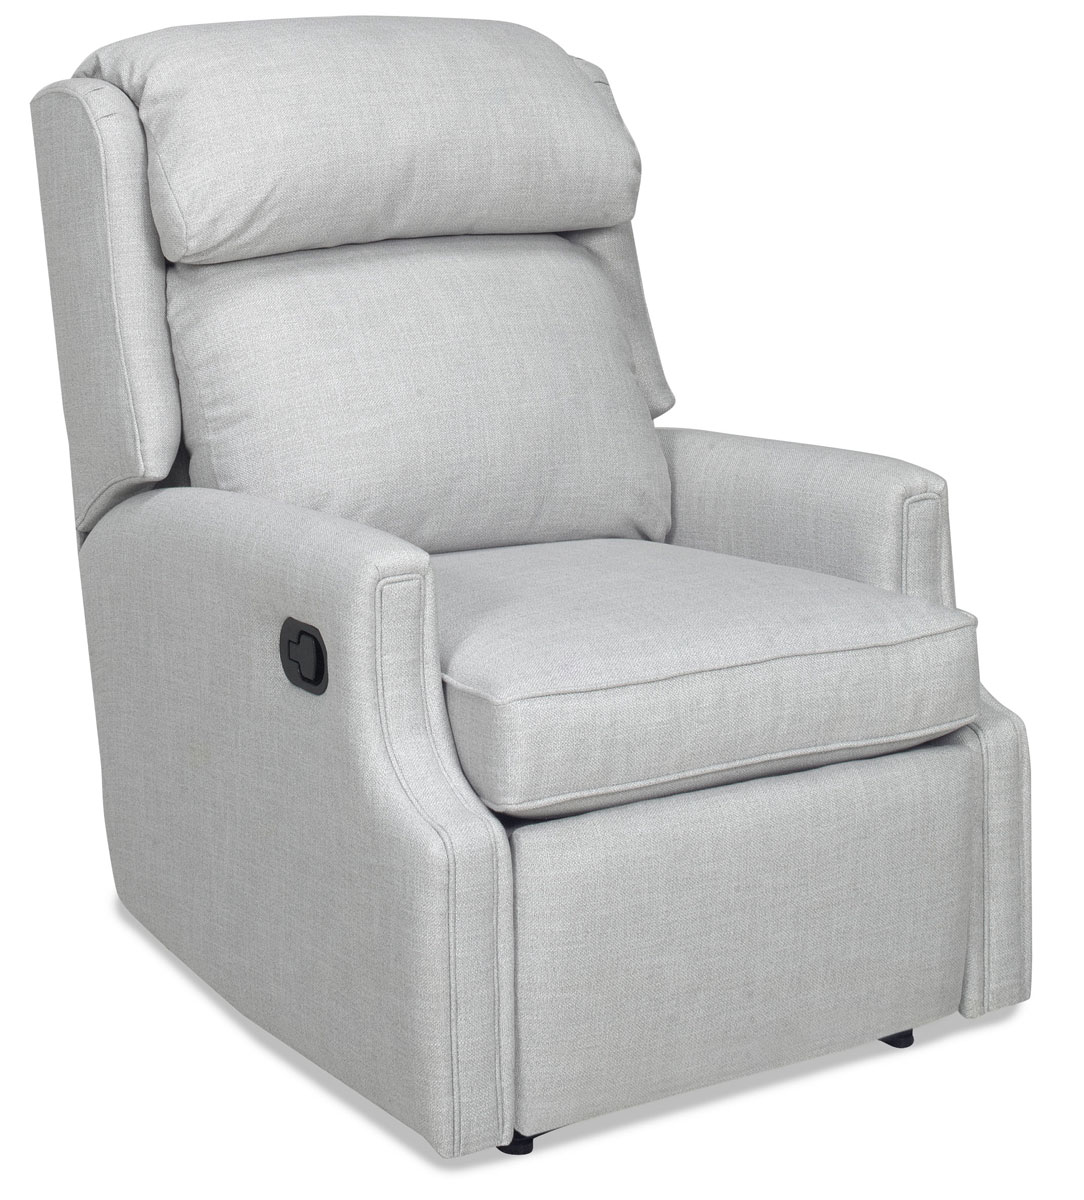 Temple Furniture 29007-TS Maverick Recliner with Track Scoop Arm 